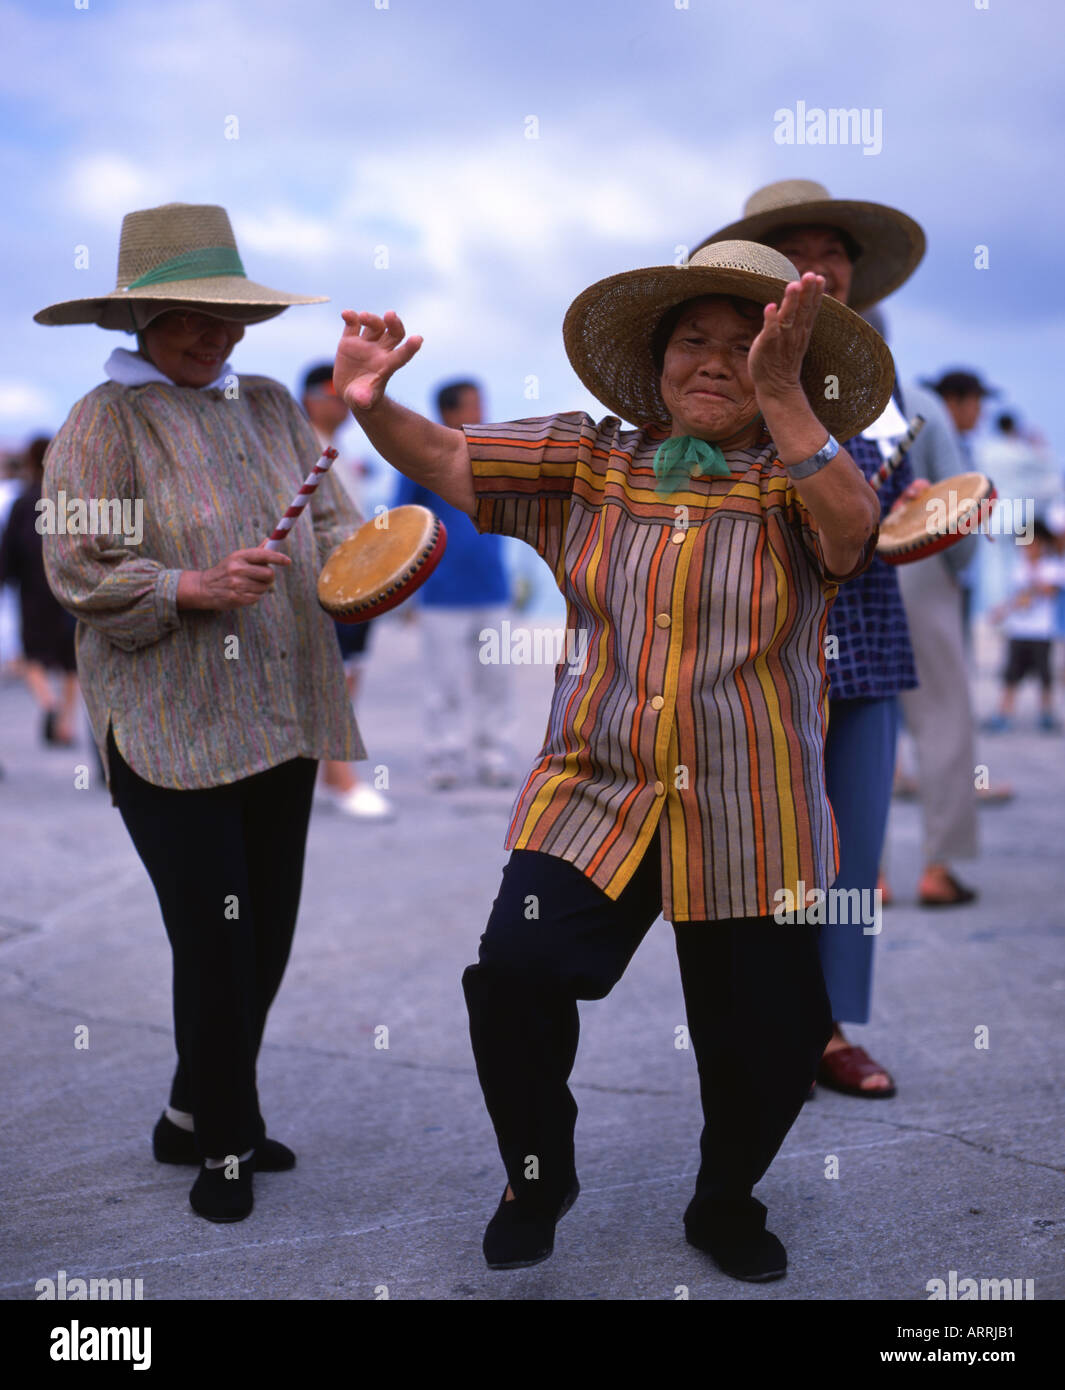 Elderly Okinawan women dance to urge on the competitors at the local dragon boat races Stock Photo